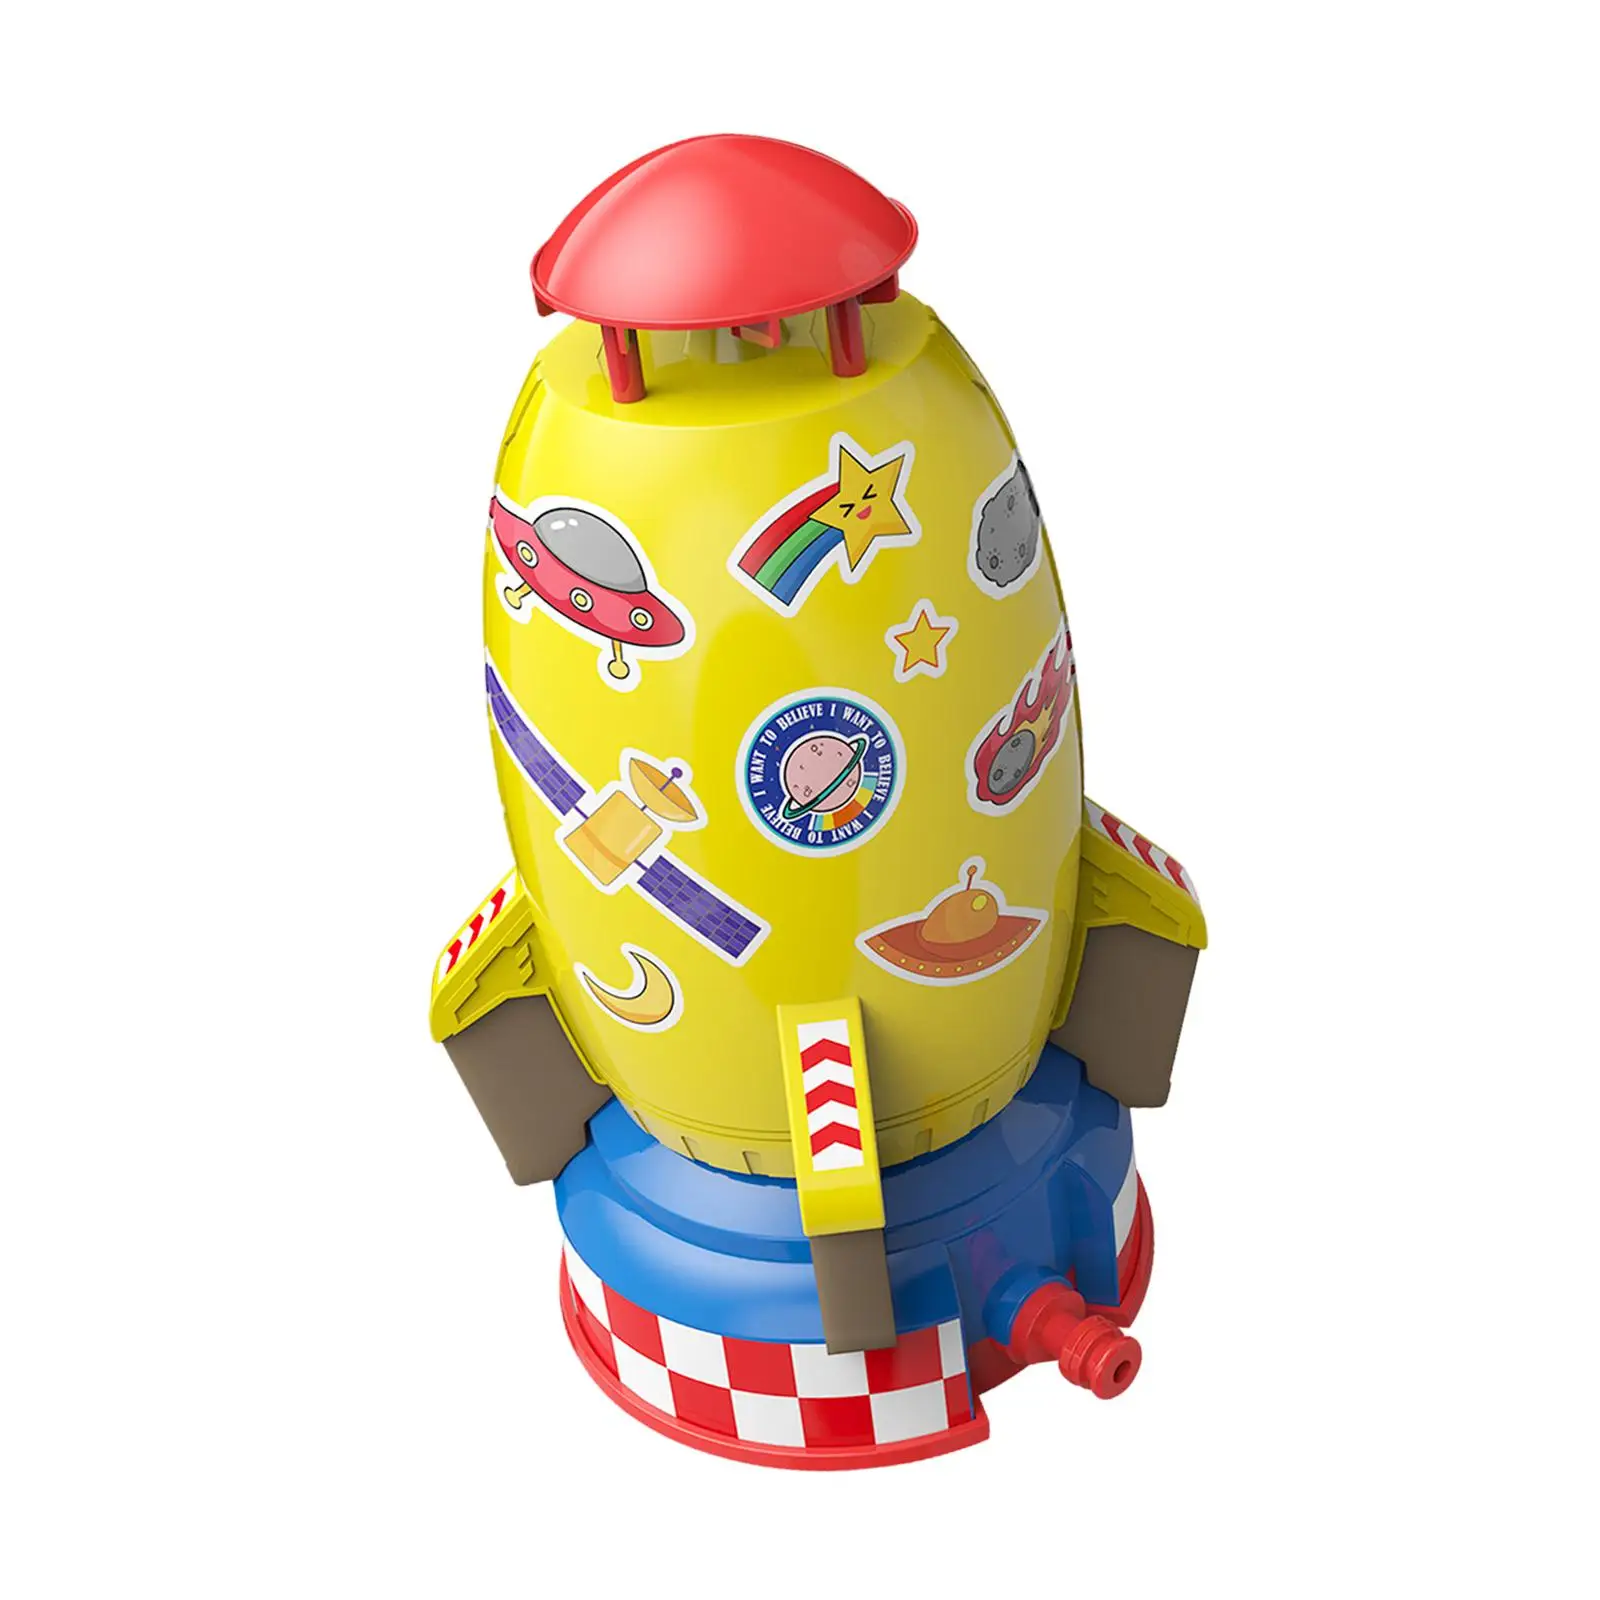 Water Games Space Rocket Shaped Yard Outdoor Water Toy for Baby Boys Kids